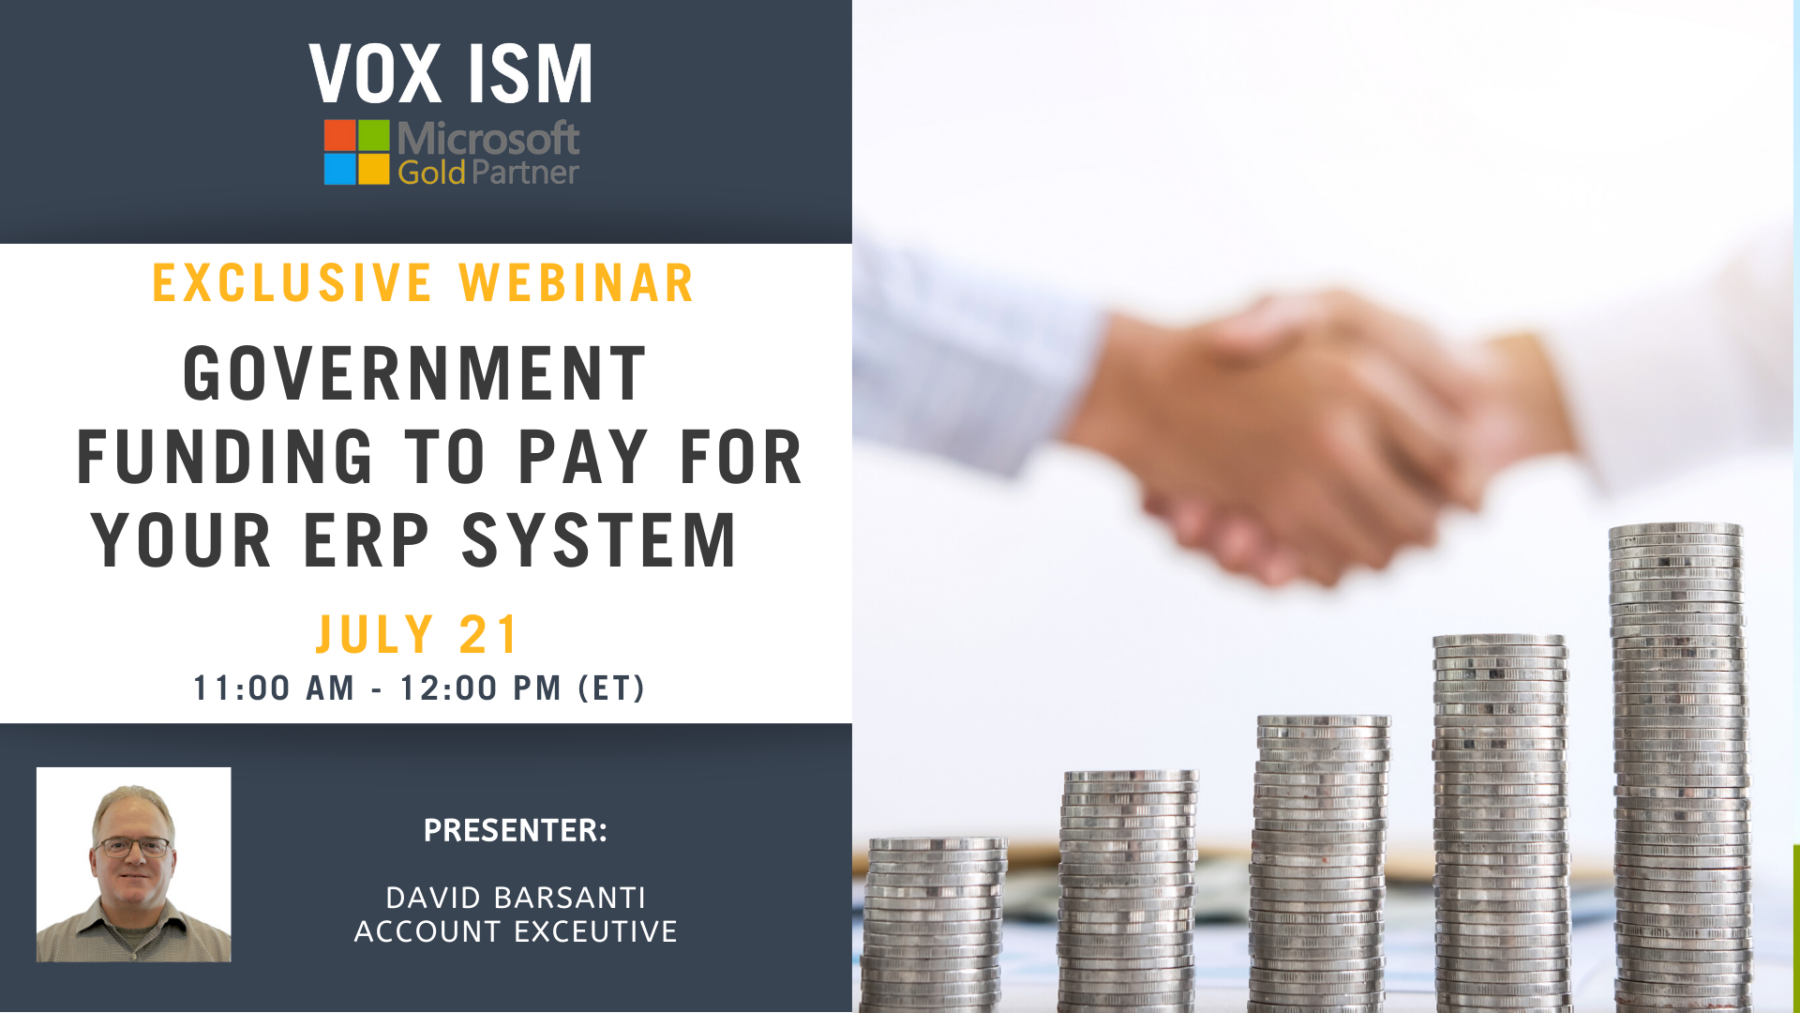 Government Funding to pay for your ERP system - July 21 - Webinar VOX ISM